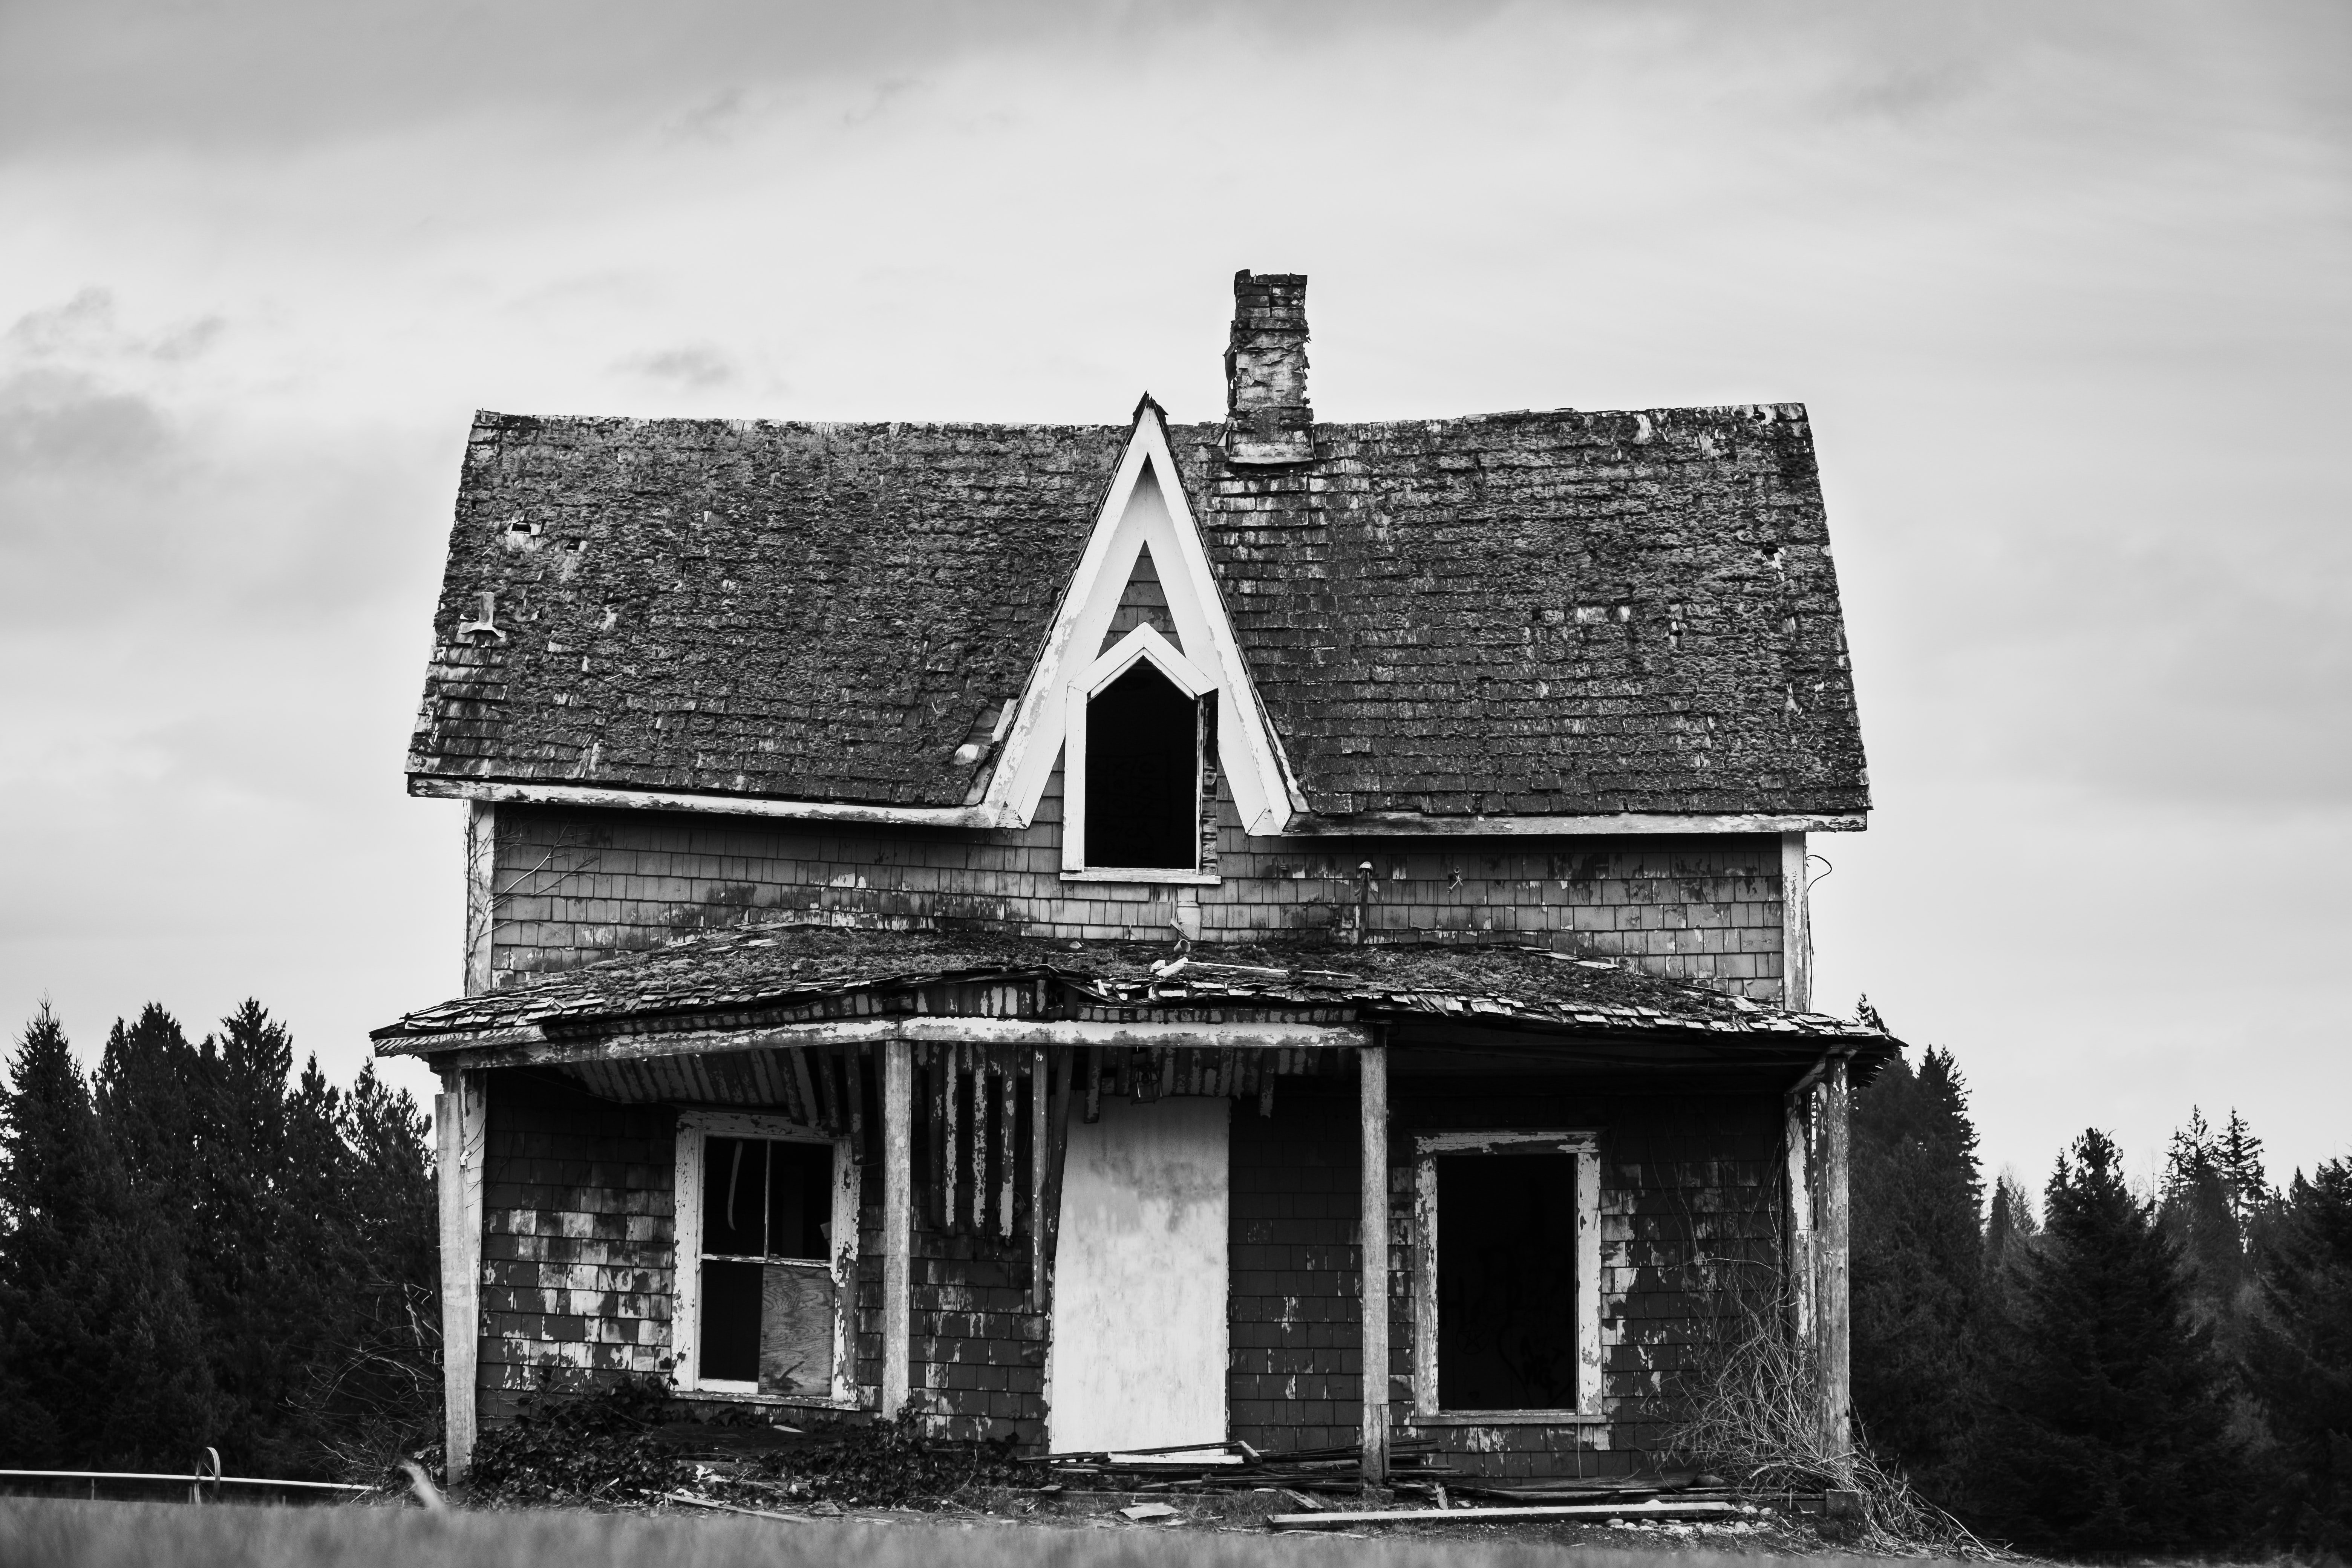 The house's poor condition bothered the old man. | Source: Unsplash